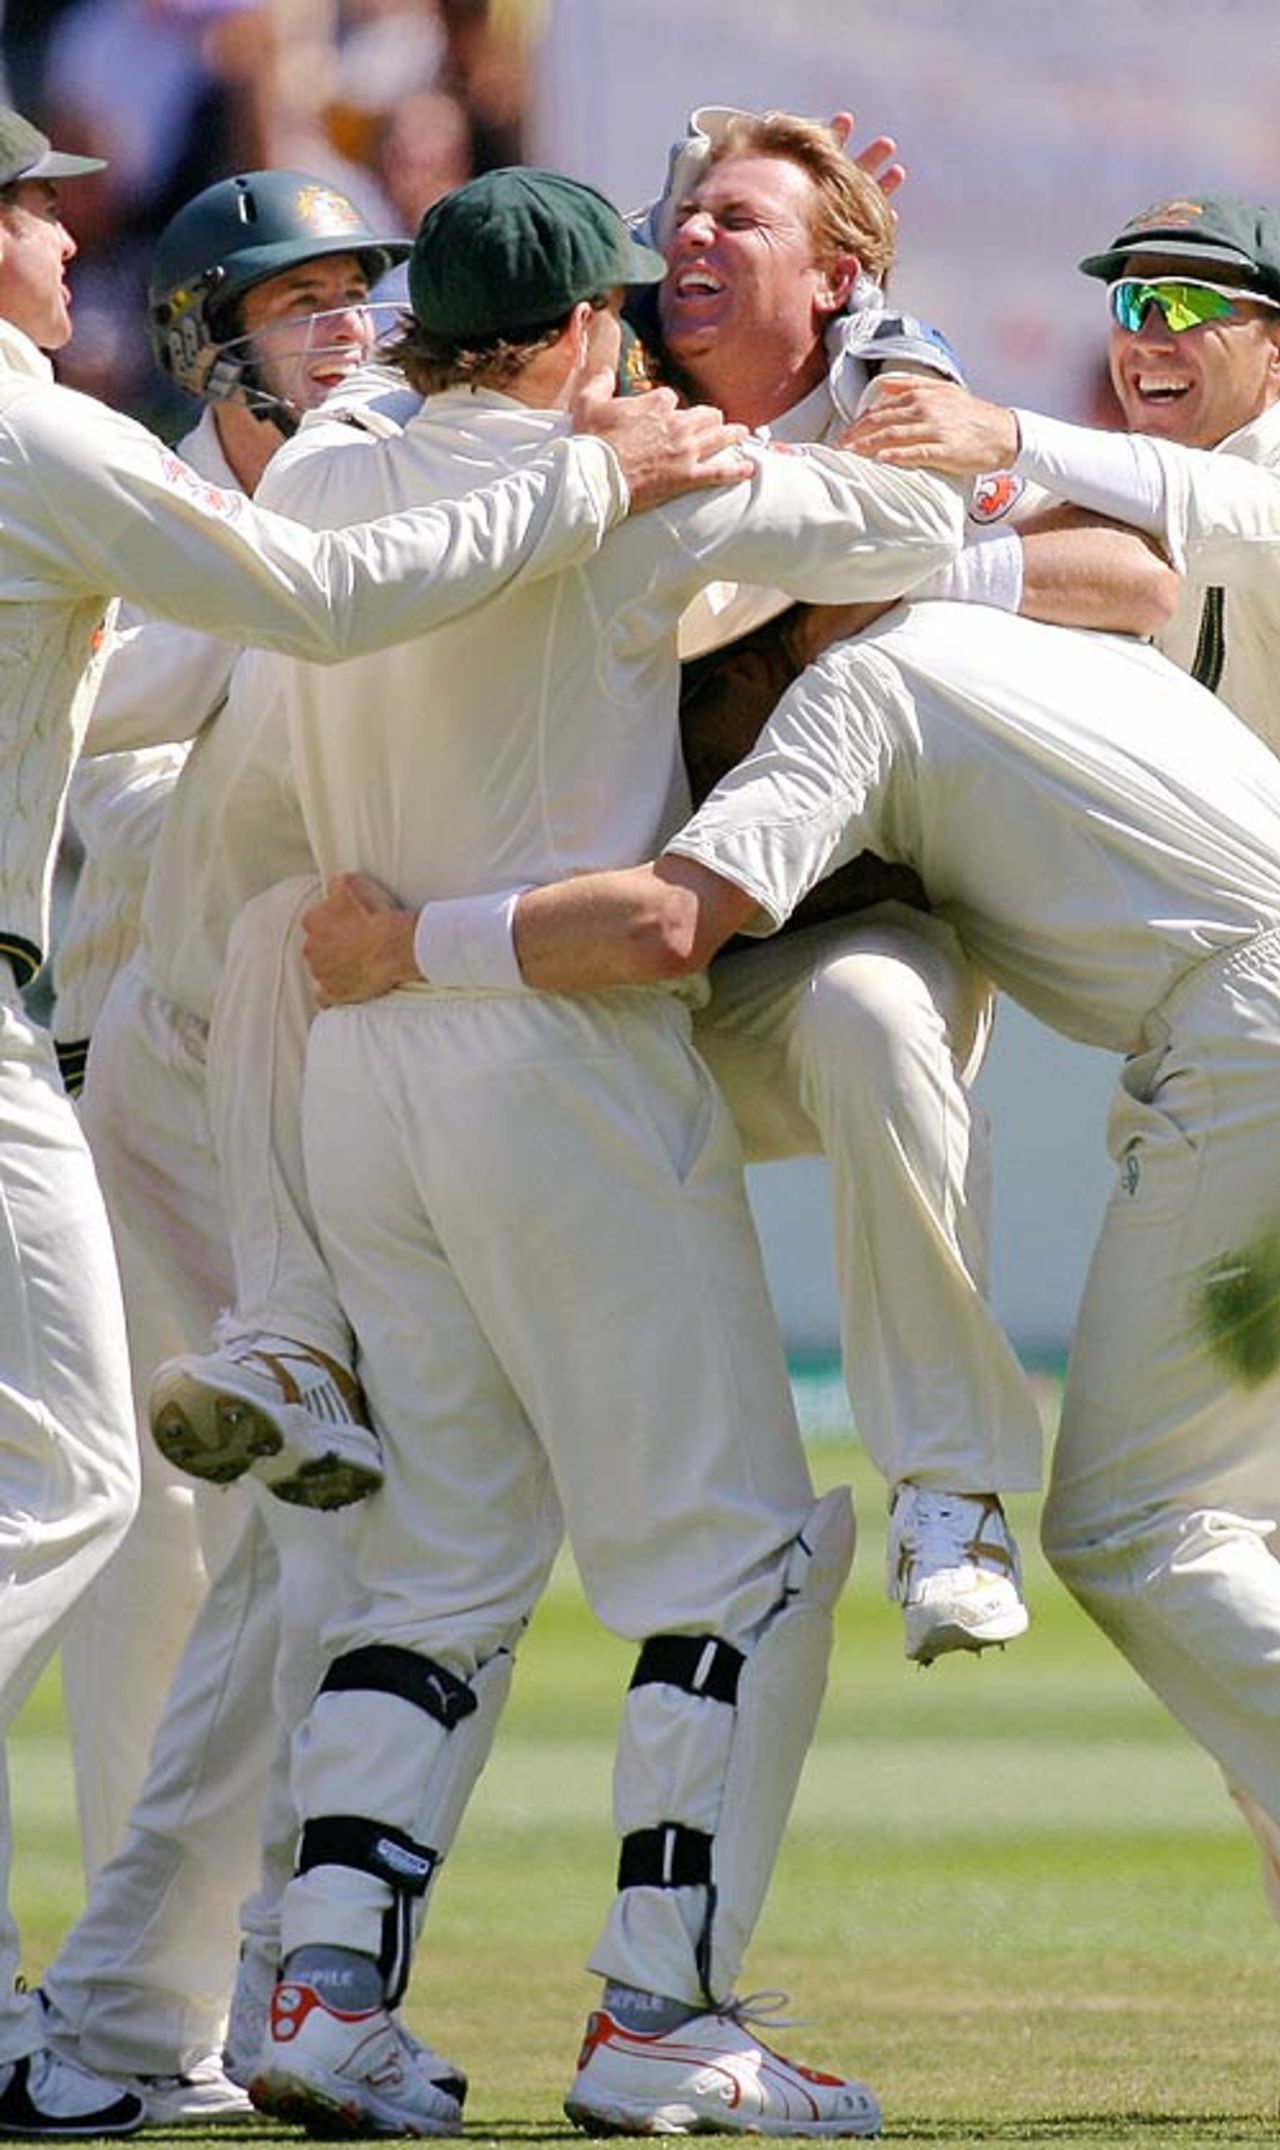 Shane Warne is mobbed after trapping Sajid Mahmood lbw with a flipper, Australia v England, 4th Test, Melbourne, December 28, 2006